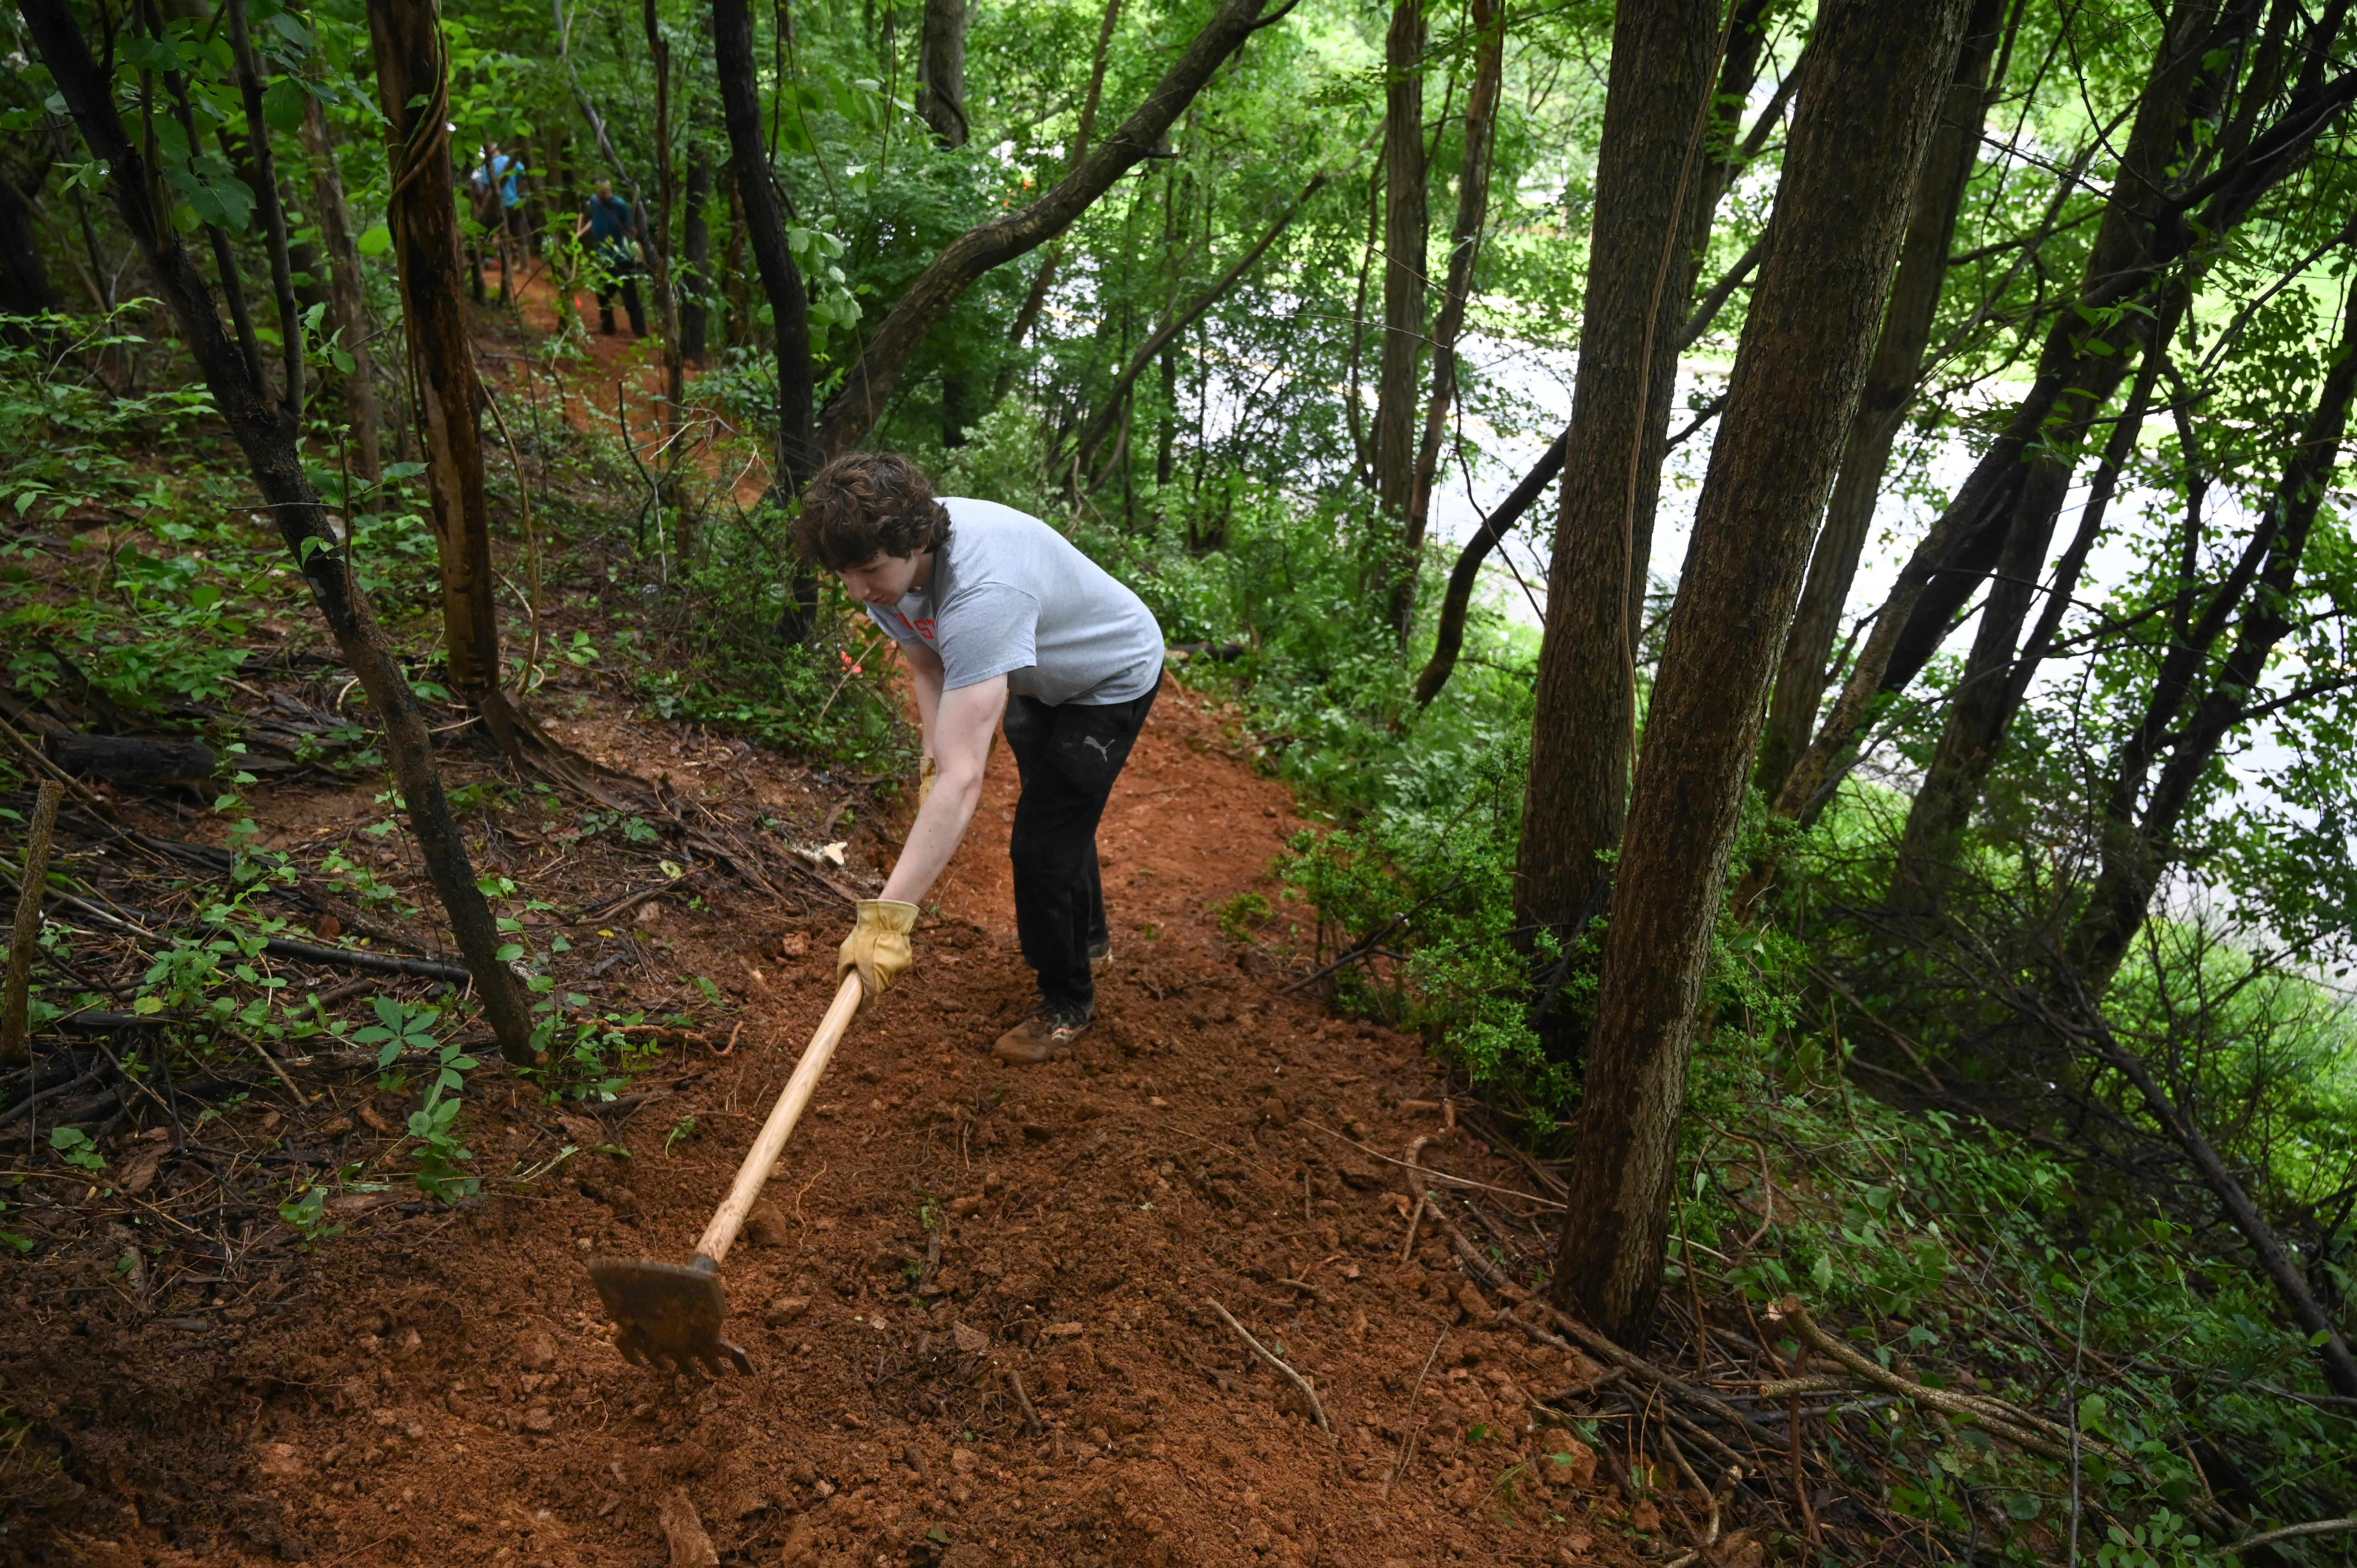 Colby Jaeb works on grading a portion of the path as a group of volunteers make progress in the creation of a new bike trail, Windy Ridge Trails, at Mount Airy's East West Park on Saturday. (Brian Krista/staff photo)